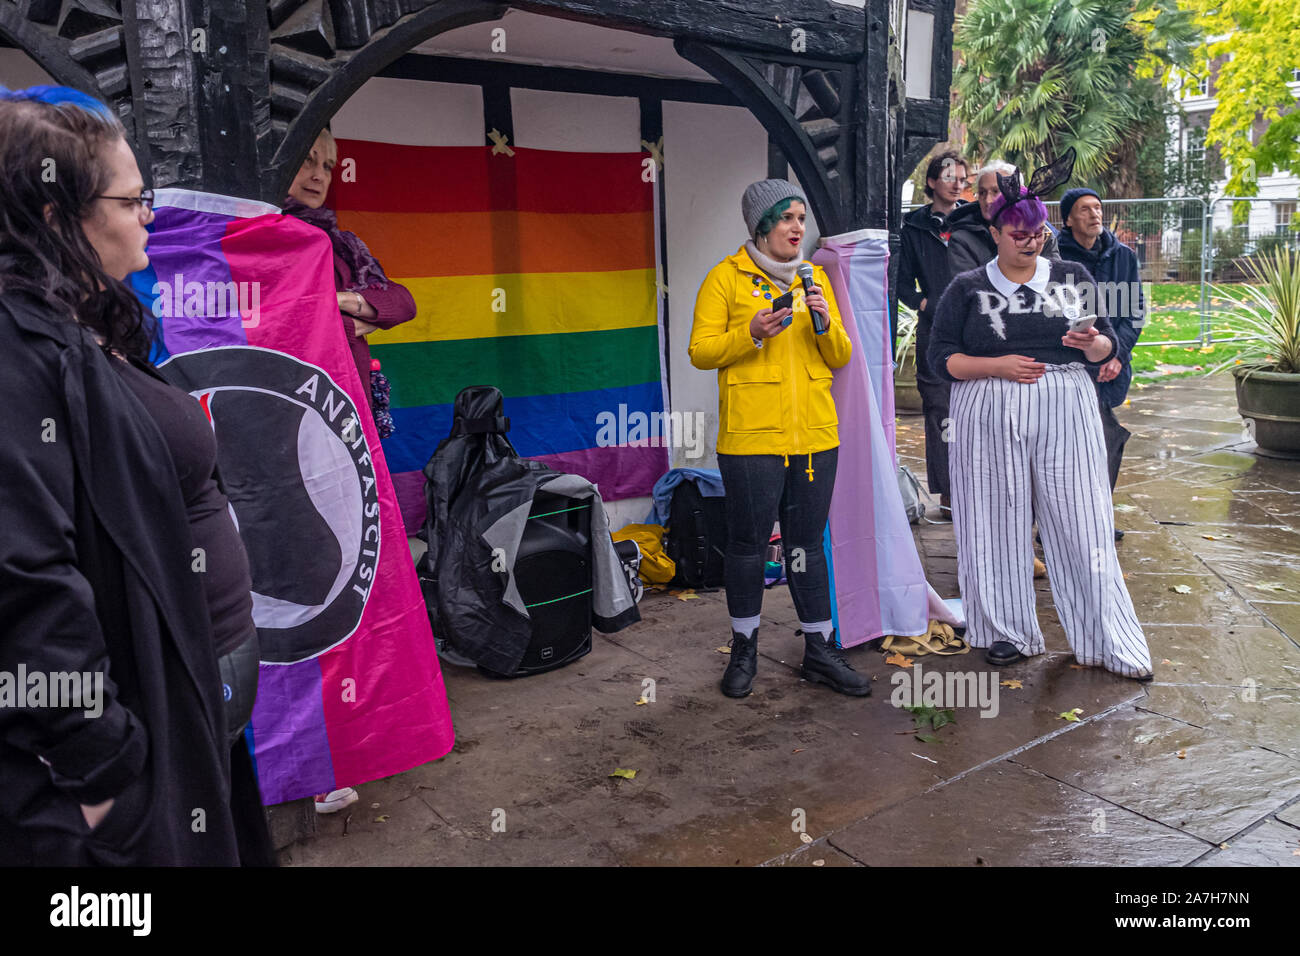 London, UK. 2nd November 2019. A protest in Soho Square opposed the activities of a new hate group which promotes transphobia, calling itself the 'LGB Alliance', claiming it is protecting LGB people. The protest pointed out that trans and non-binary people have always been a part of the gay community and played an important part in the fight for gay rights and there is no place for such bi-phobic and gay-separist views in the gay community. Peter Marshall/Alamy Live News Stock Photo